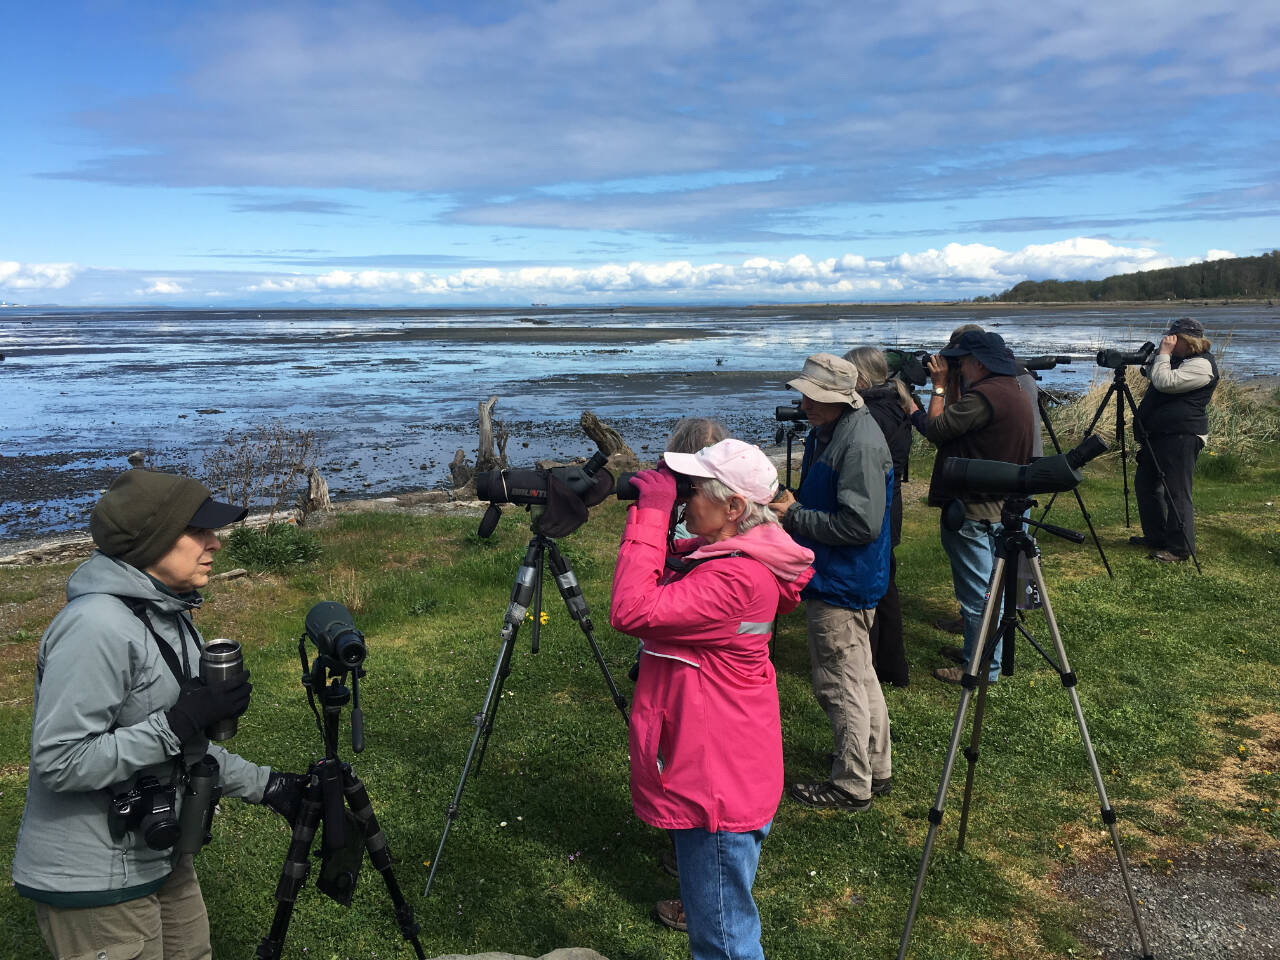 Photo courtesy of Dungeness River Nature Center / Attendees of a recent Olympic BirdFest enjoy a field trip at Dungeness Landing. Registration for the 2023 event is open now at OlympicBirdFest.org.